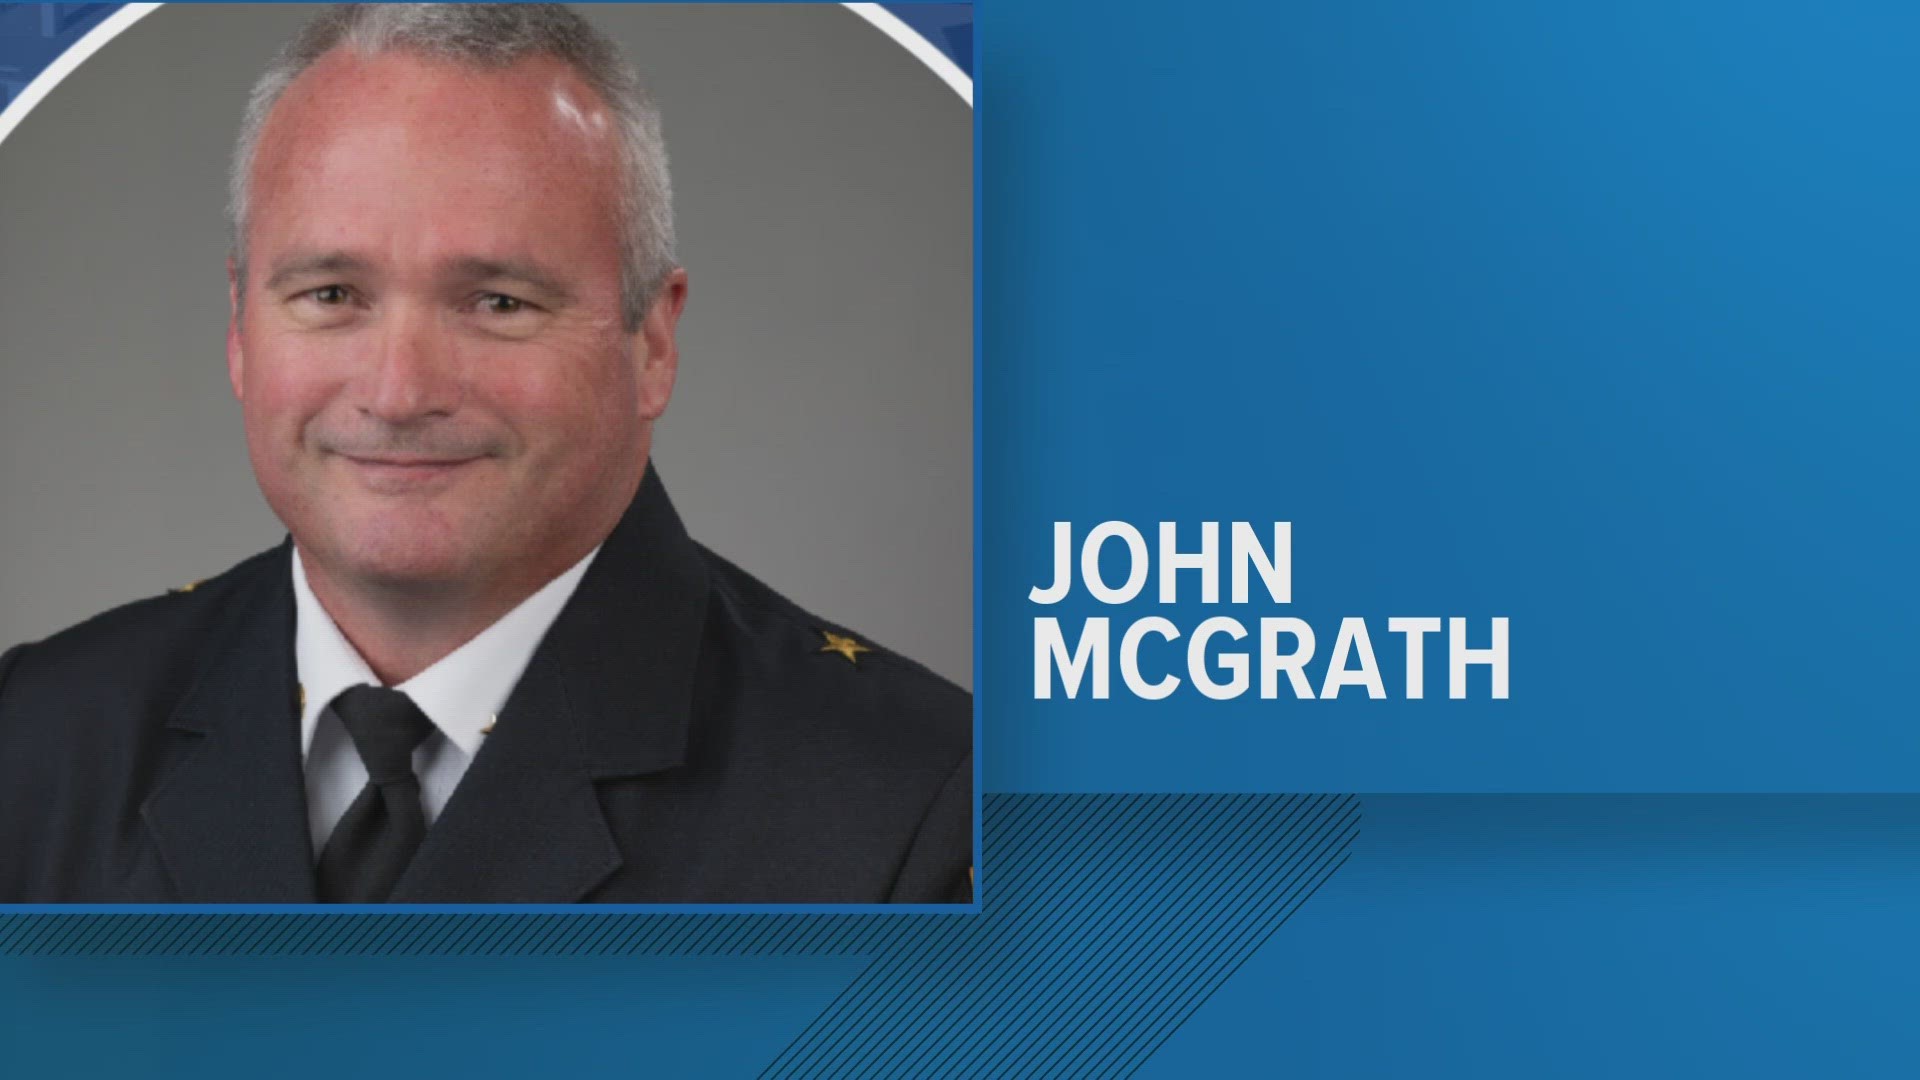 Chief John McGrath has over 30 years experience in law enforcement, including being the Deputy Chief of the Arlington Police Department.